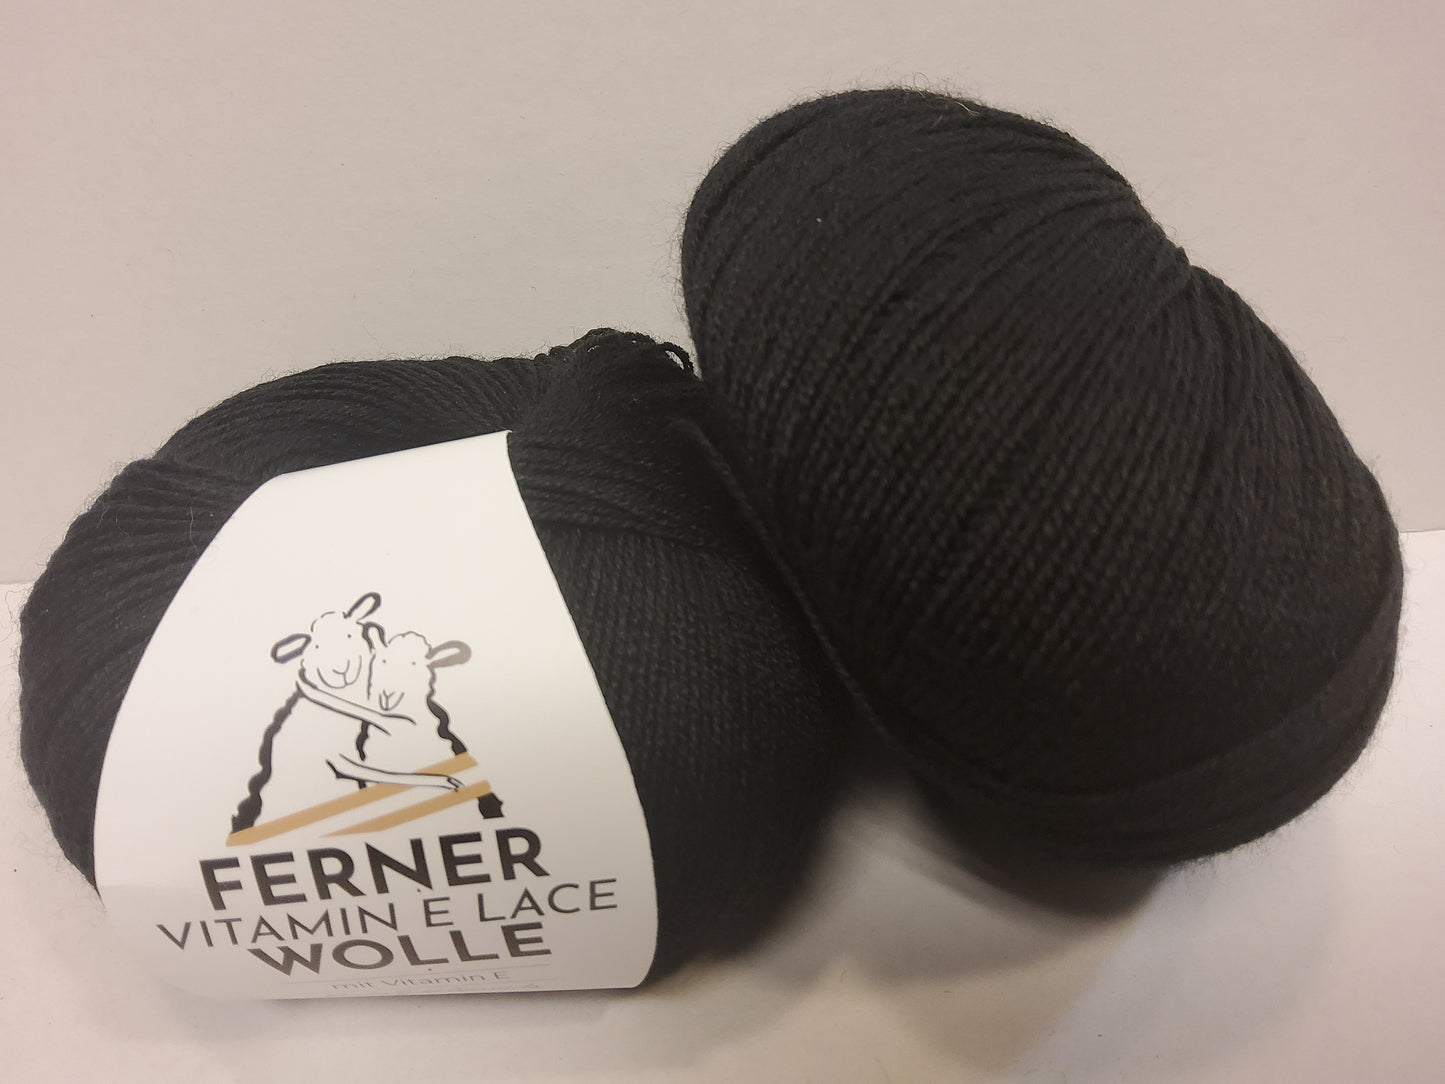 Ferner Vitamin E Lace Wolle